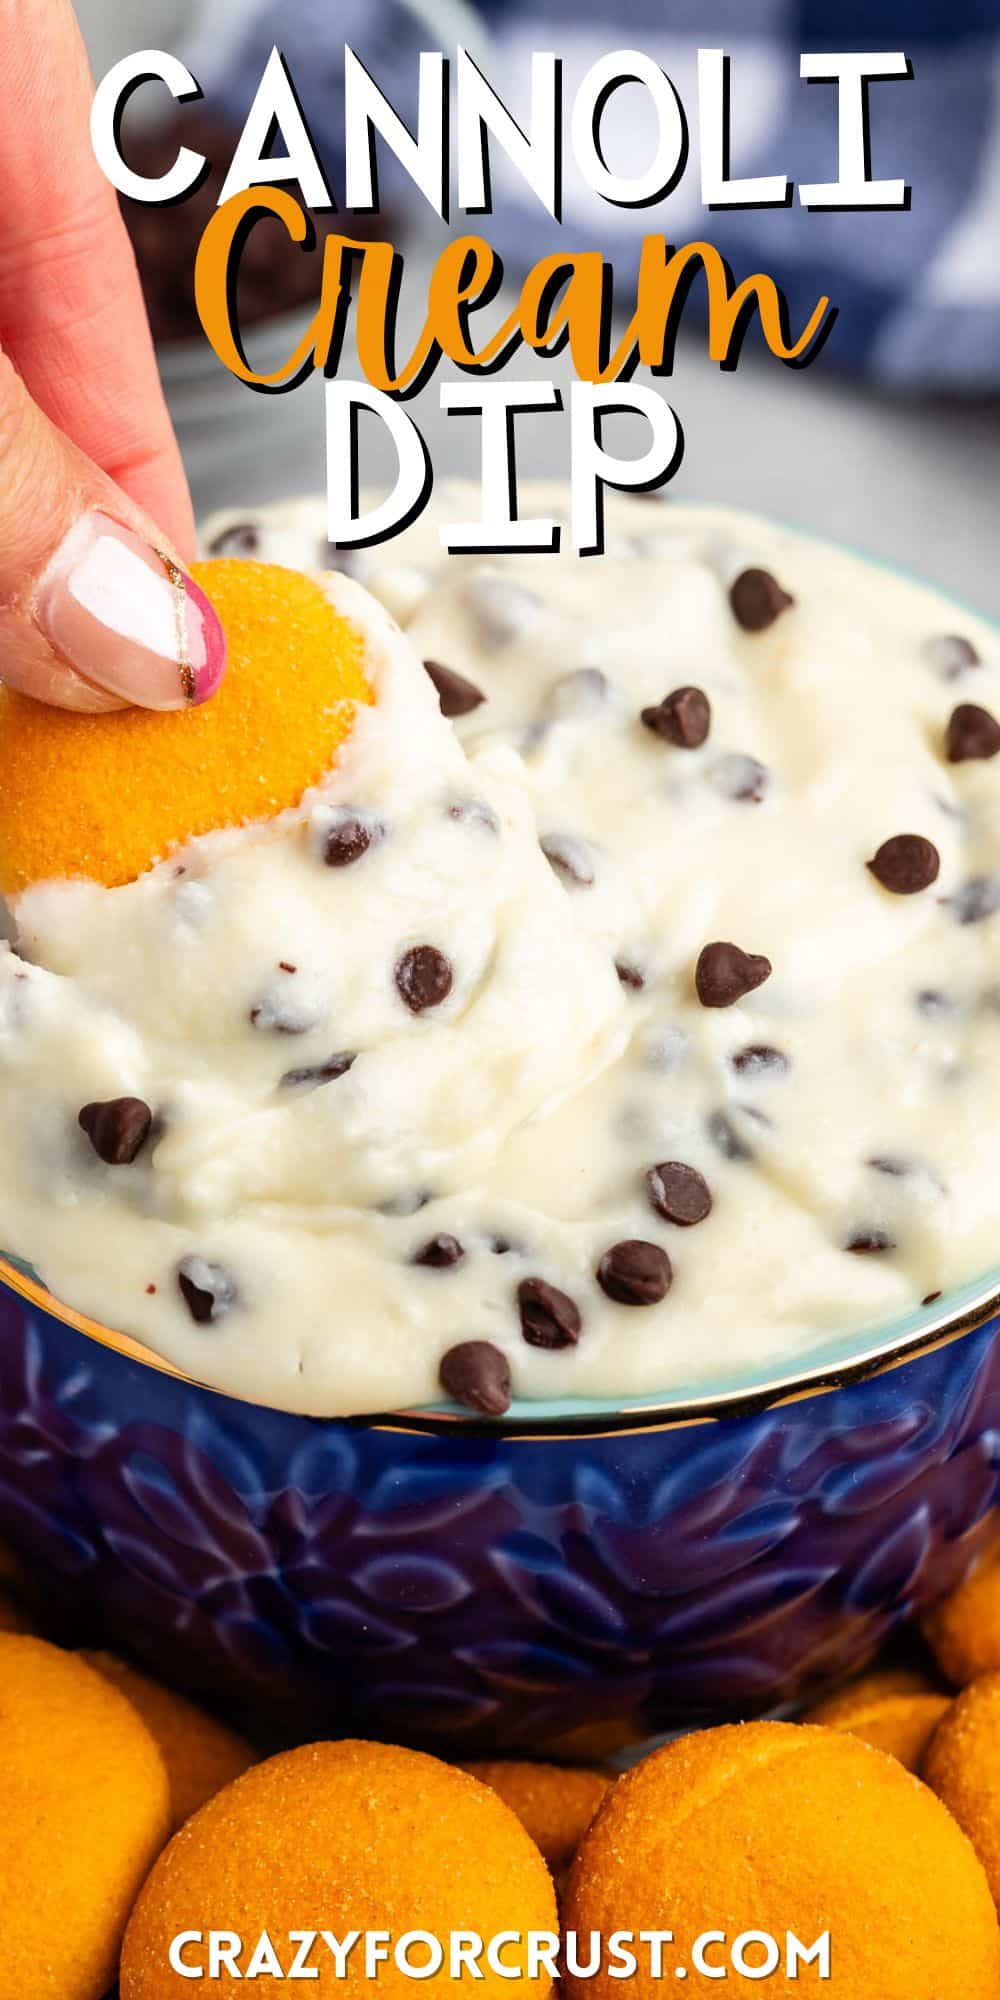 cannoli dip in a blue bowl with orange cookie wafers next to the bowl with words on the image.